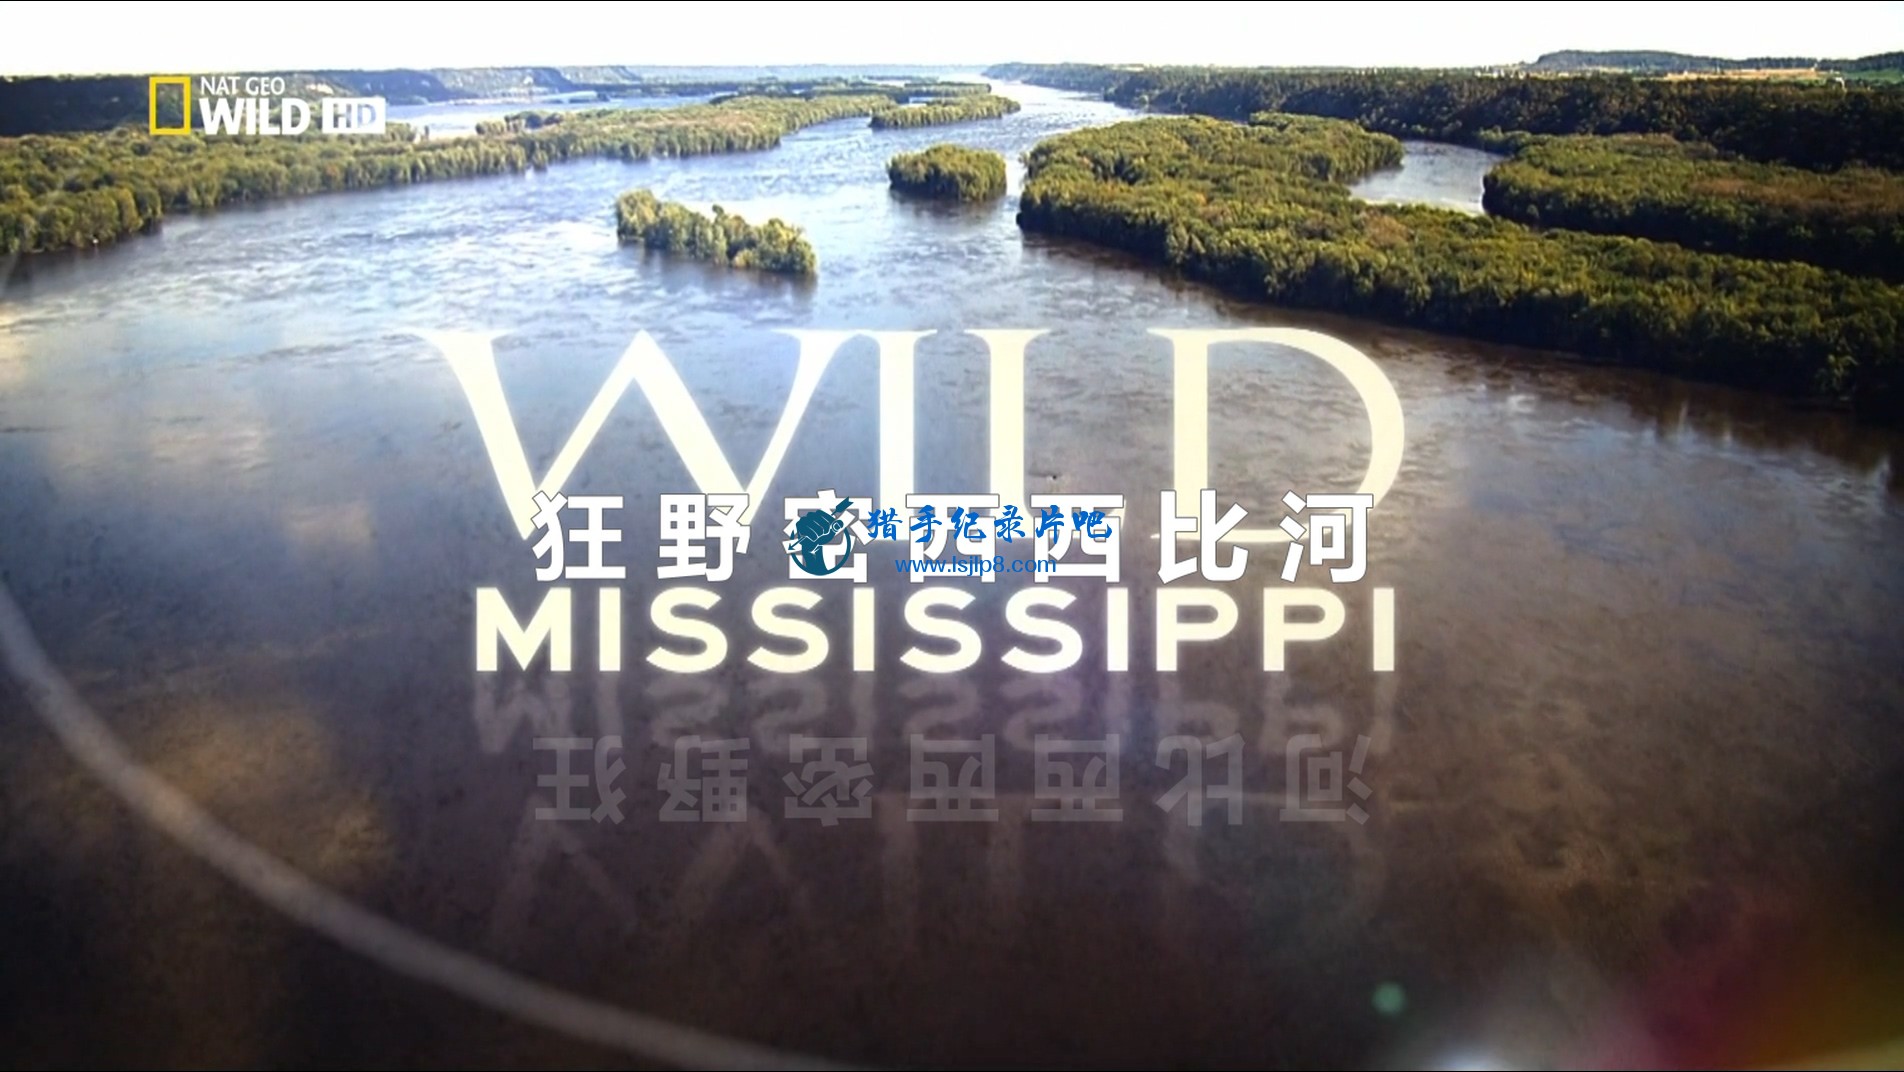 National.Geographic.Wild.Mississippi.E01.Deep.Freeze.REPACK.2011.HDTV.1080p.x264.jpg